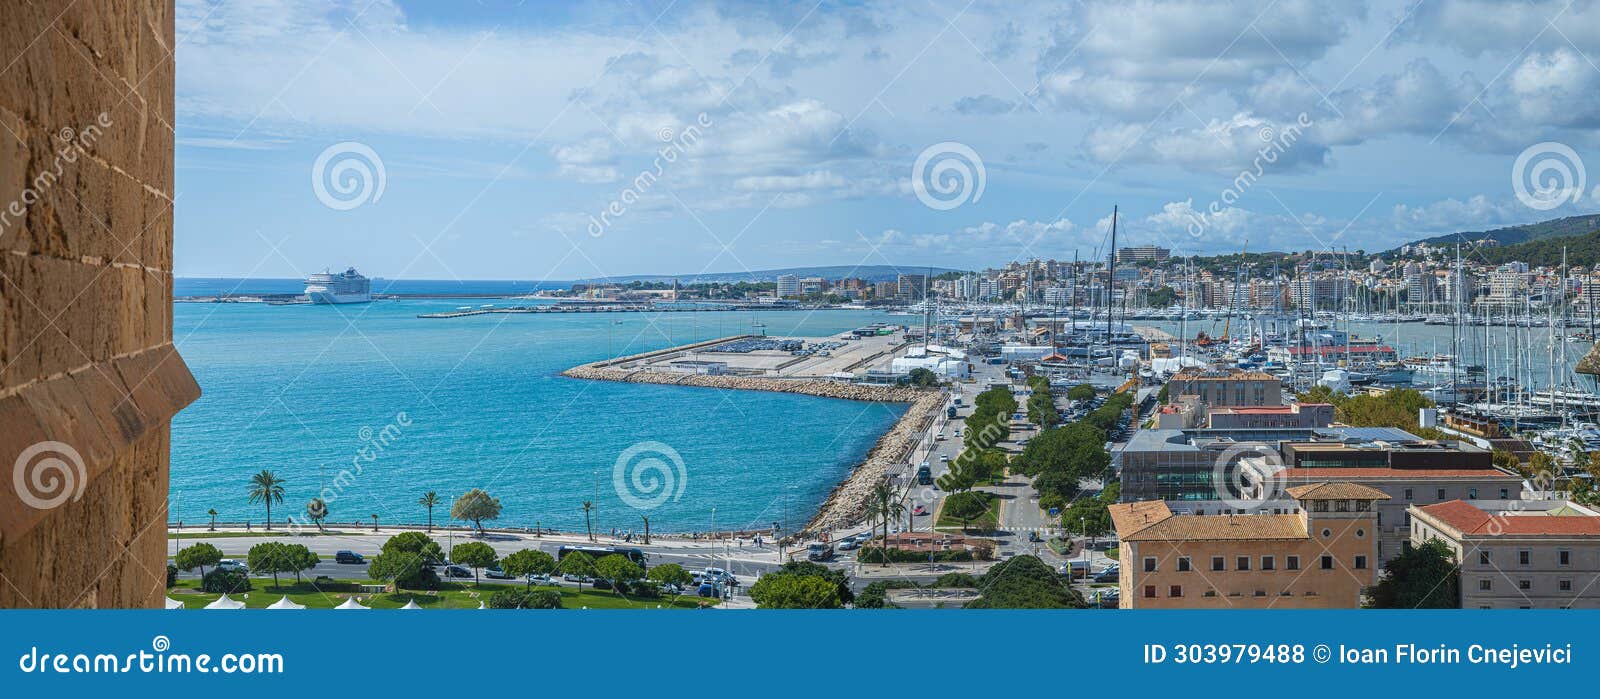 panoramic view of the port of the city of palma de mallorca, illes balears, spain